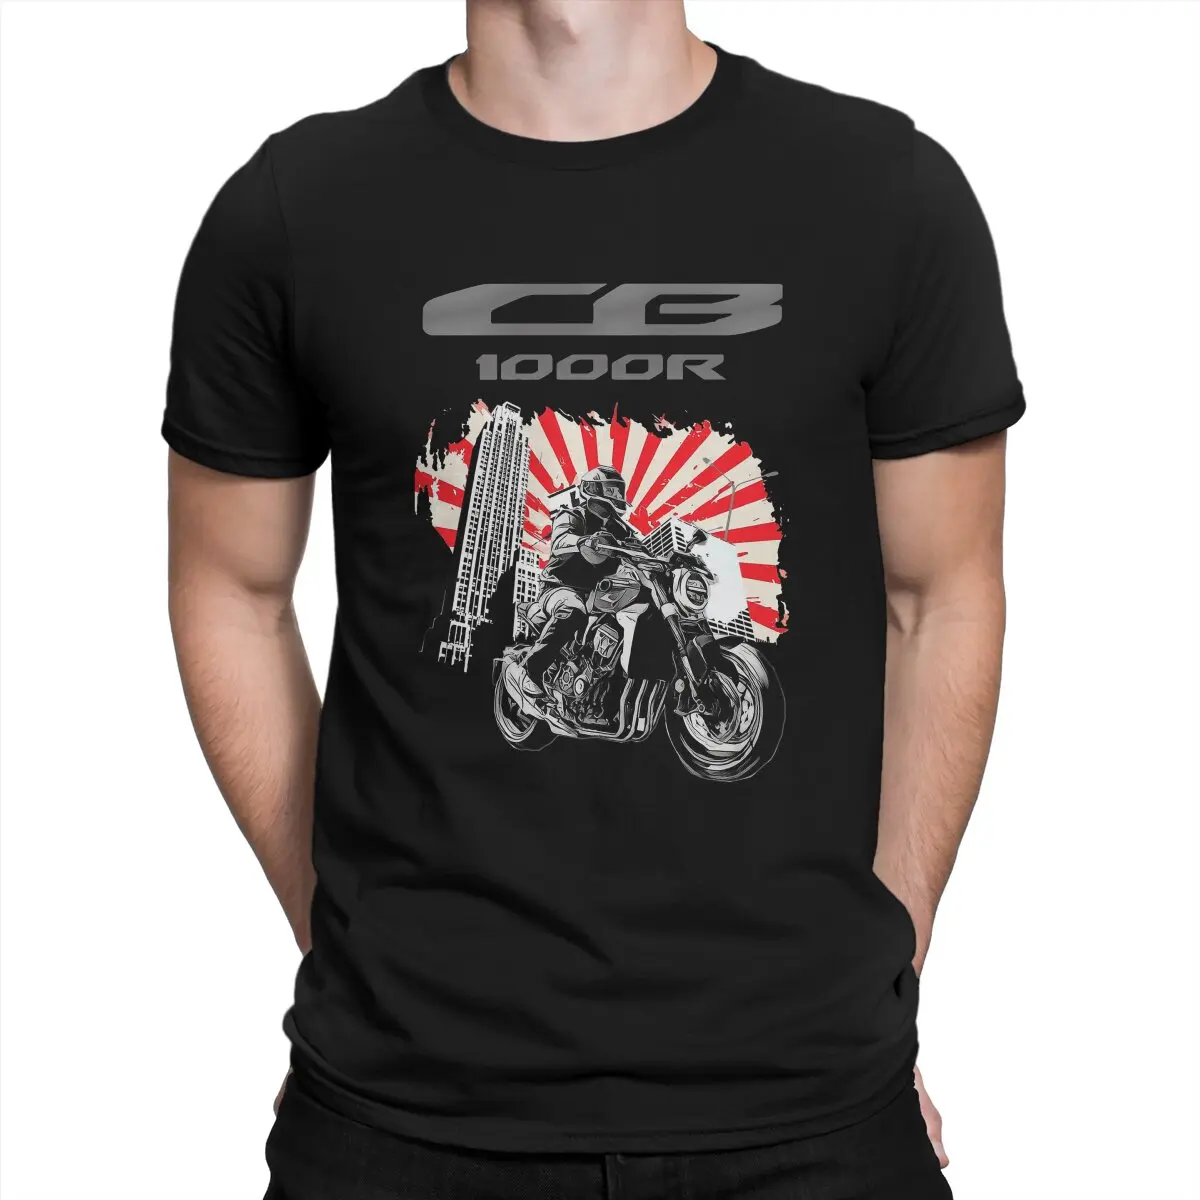 

CB1000R T-Shirts for Men Motorcycles Moto Hipster 100% Cotton Tees Crew Neck Short Sleeve T Shirt Gift Idea Tops